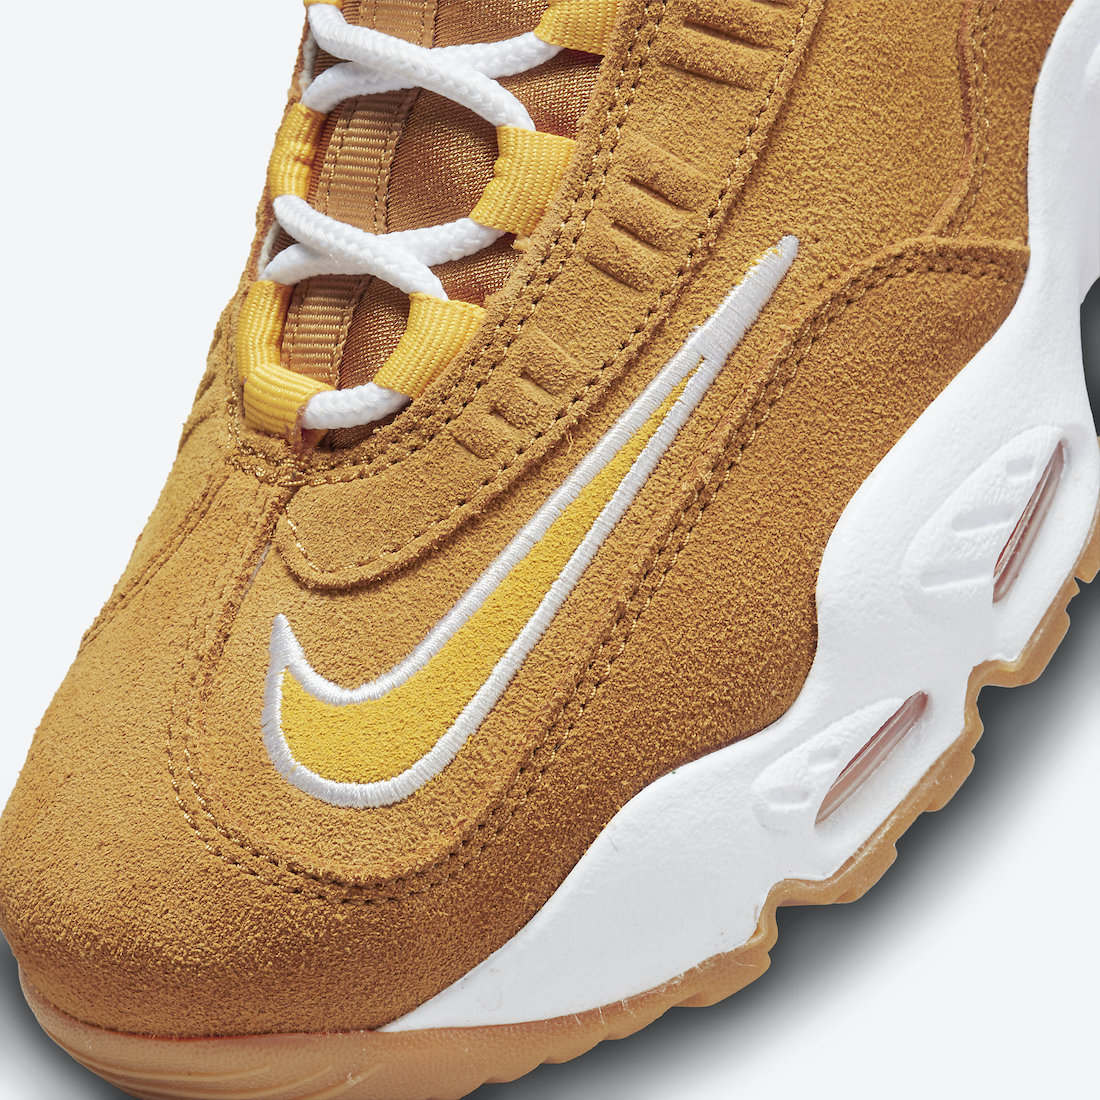 nike air griffey max 1 wheat gs DO6685 700 release date 6